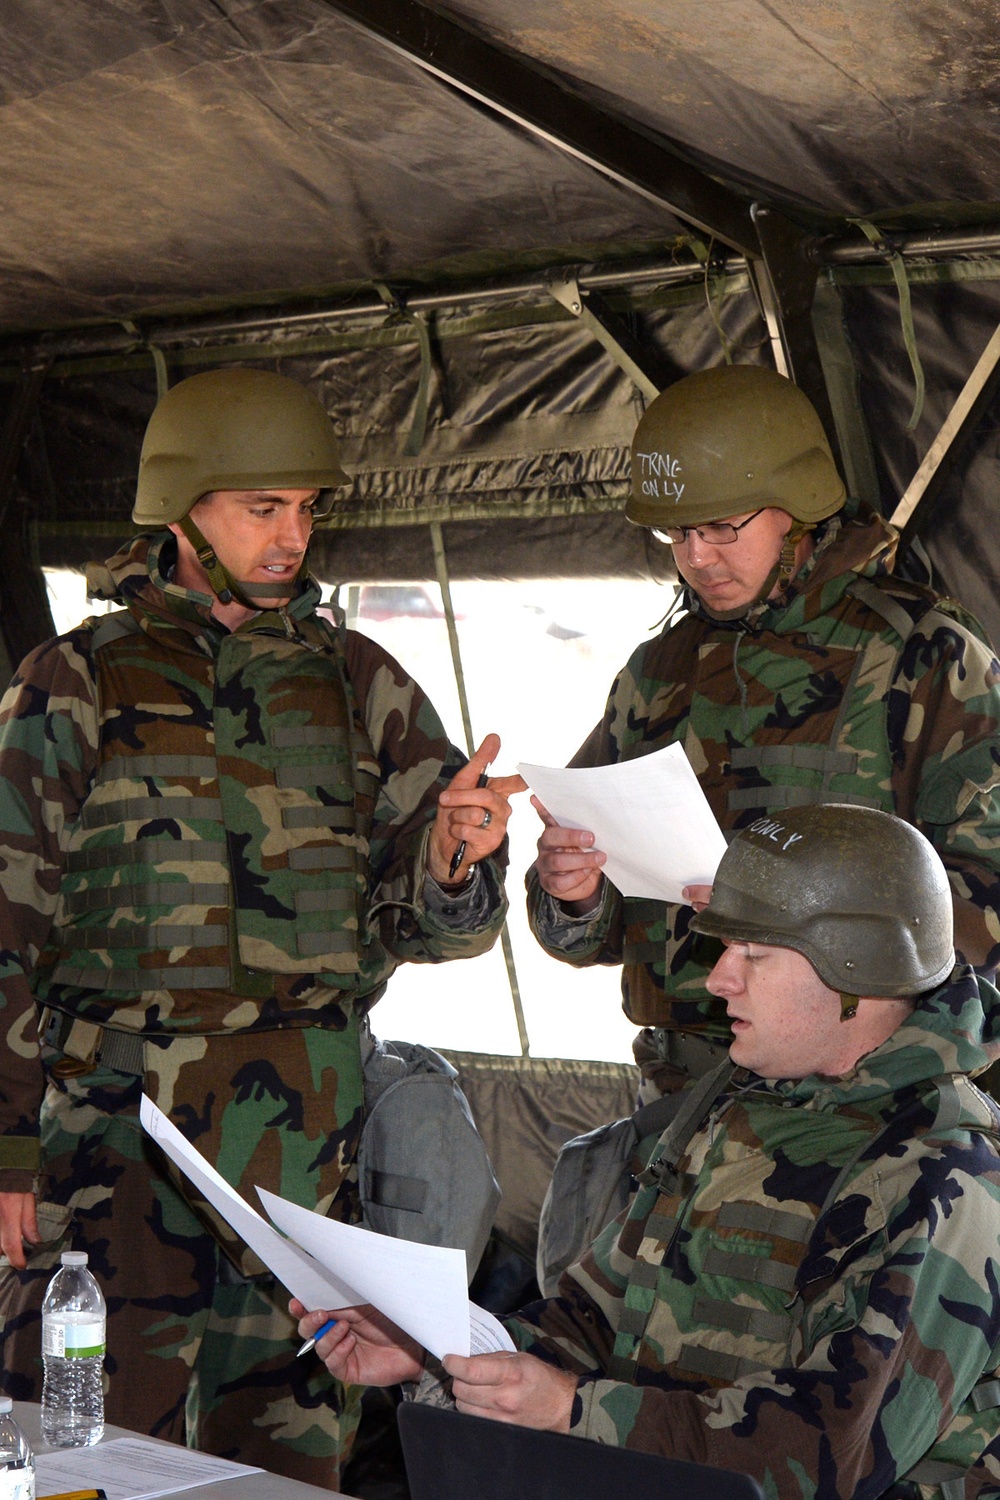 Contracting personnel sharpen skills during field exercise